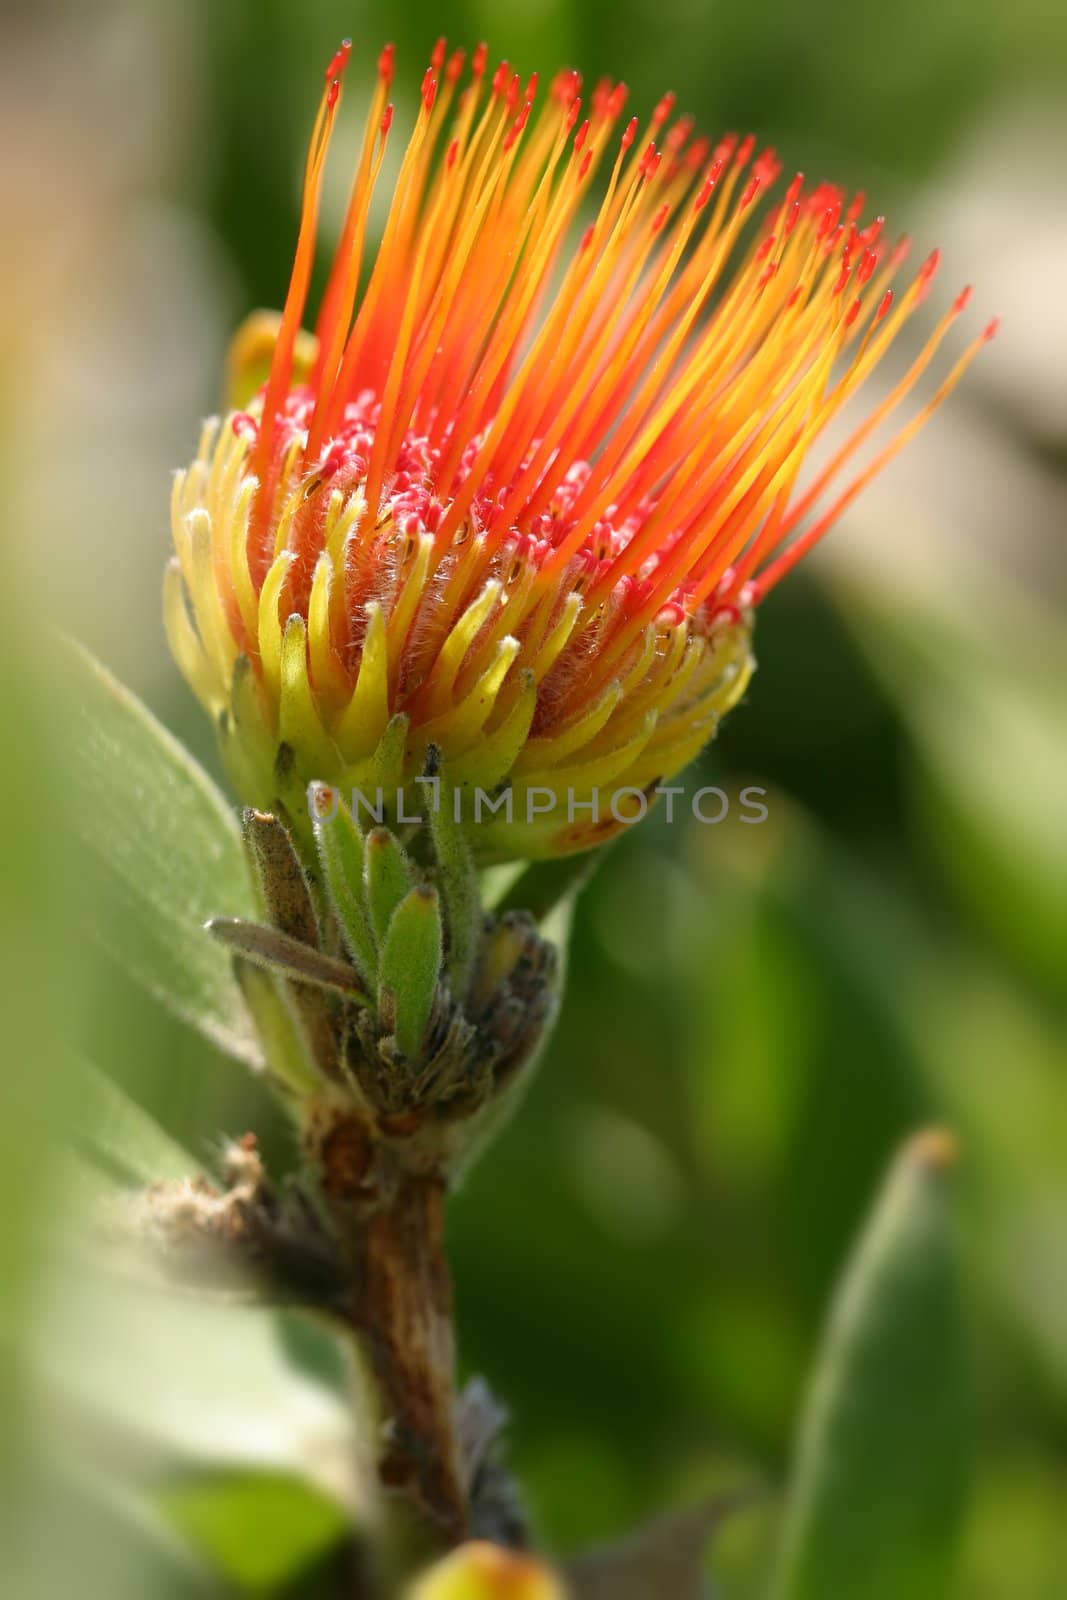 Distinctive shaped flower heads which look like a pincushion filled with pins. 
The pins are female parts (styles), and the short ribbons are anthers and stamens,  Photographed at Mt Tomah Botanical Garden
